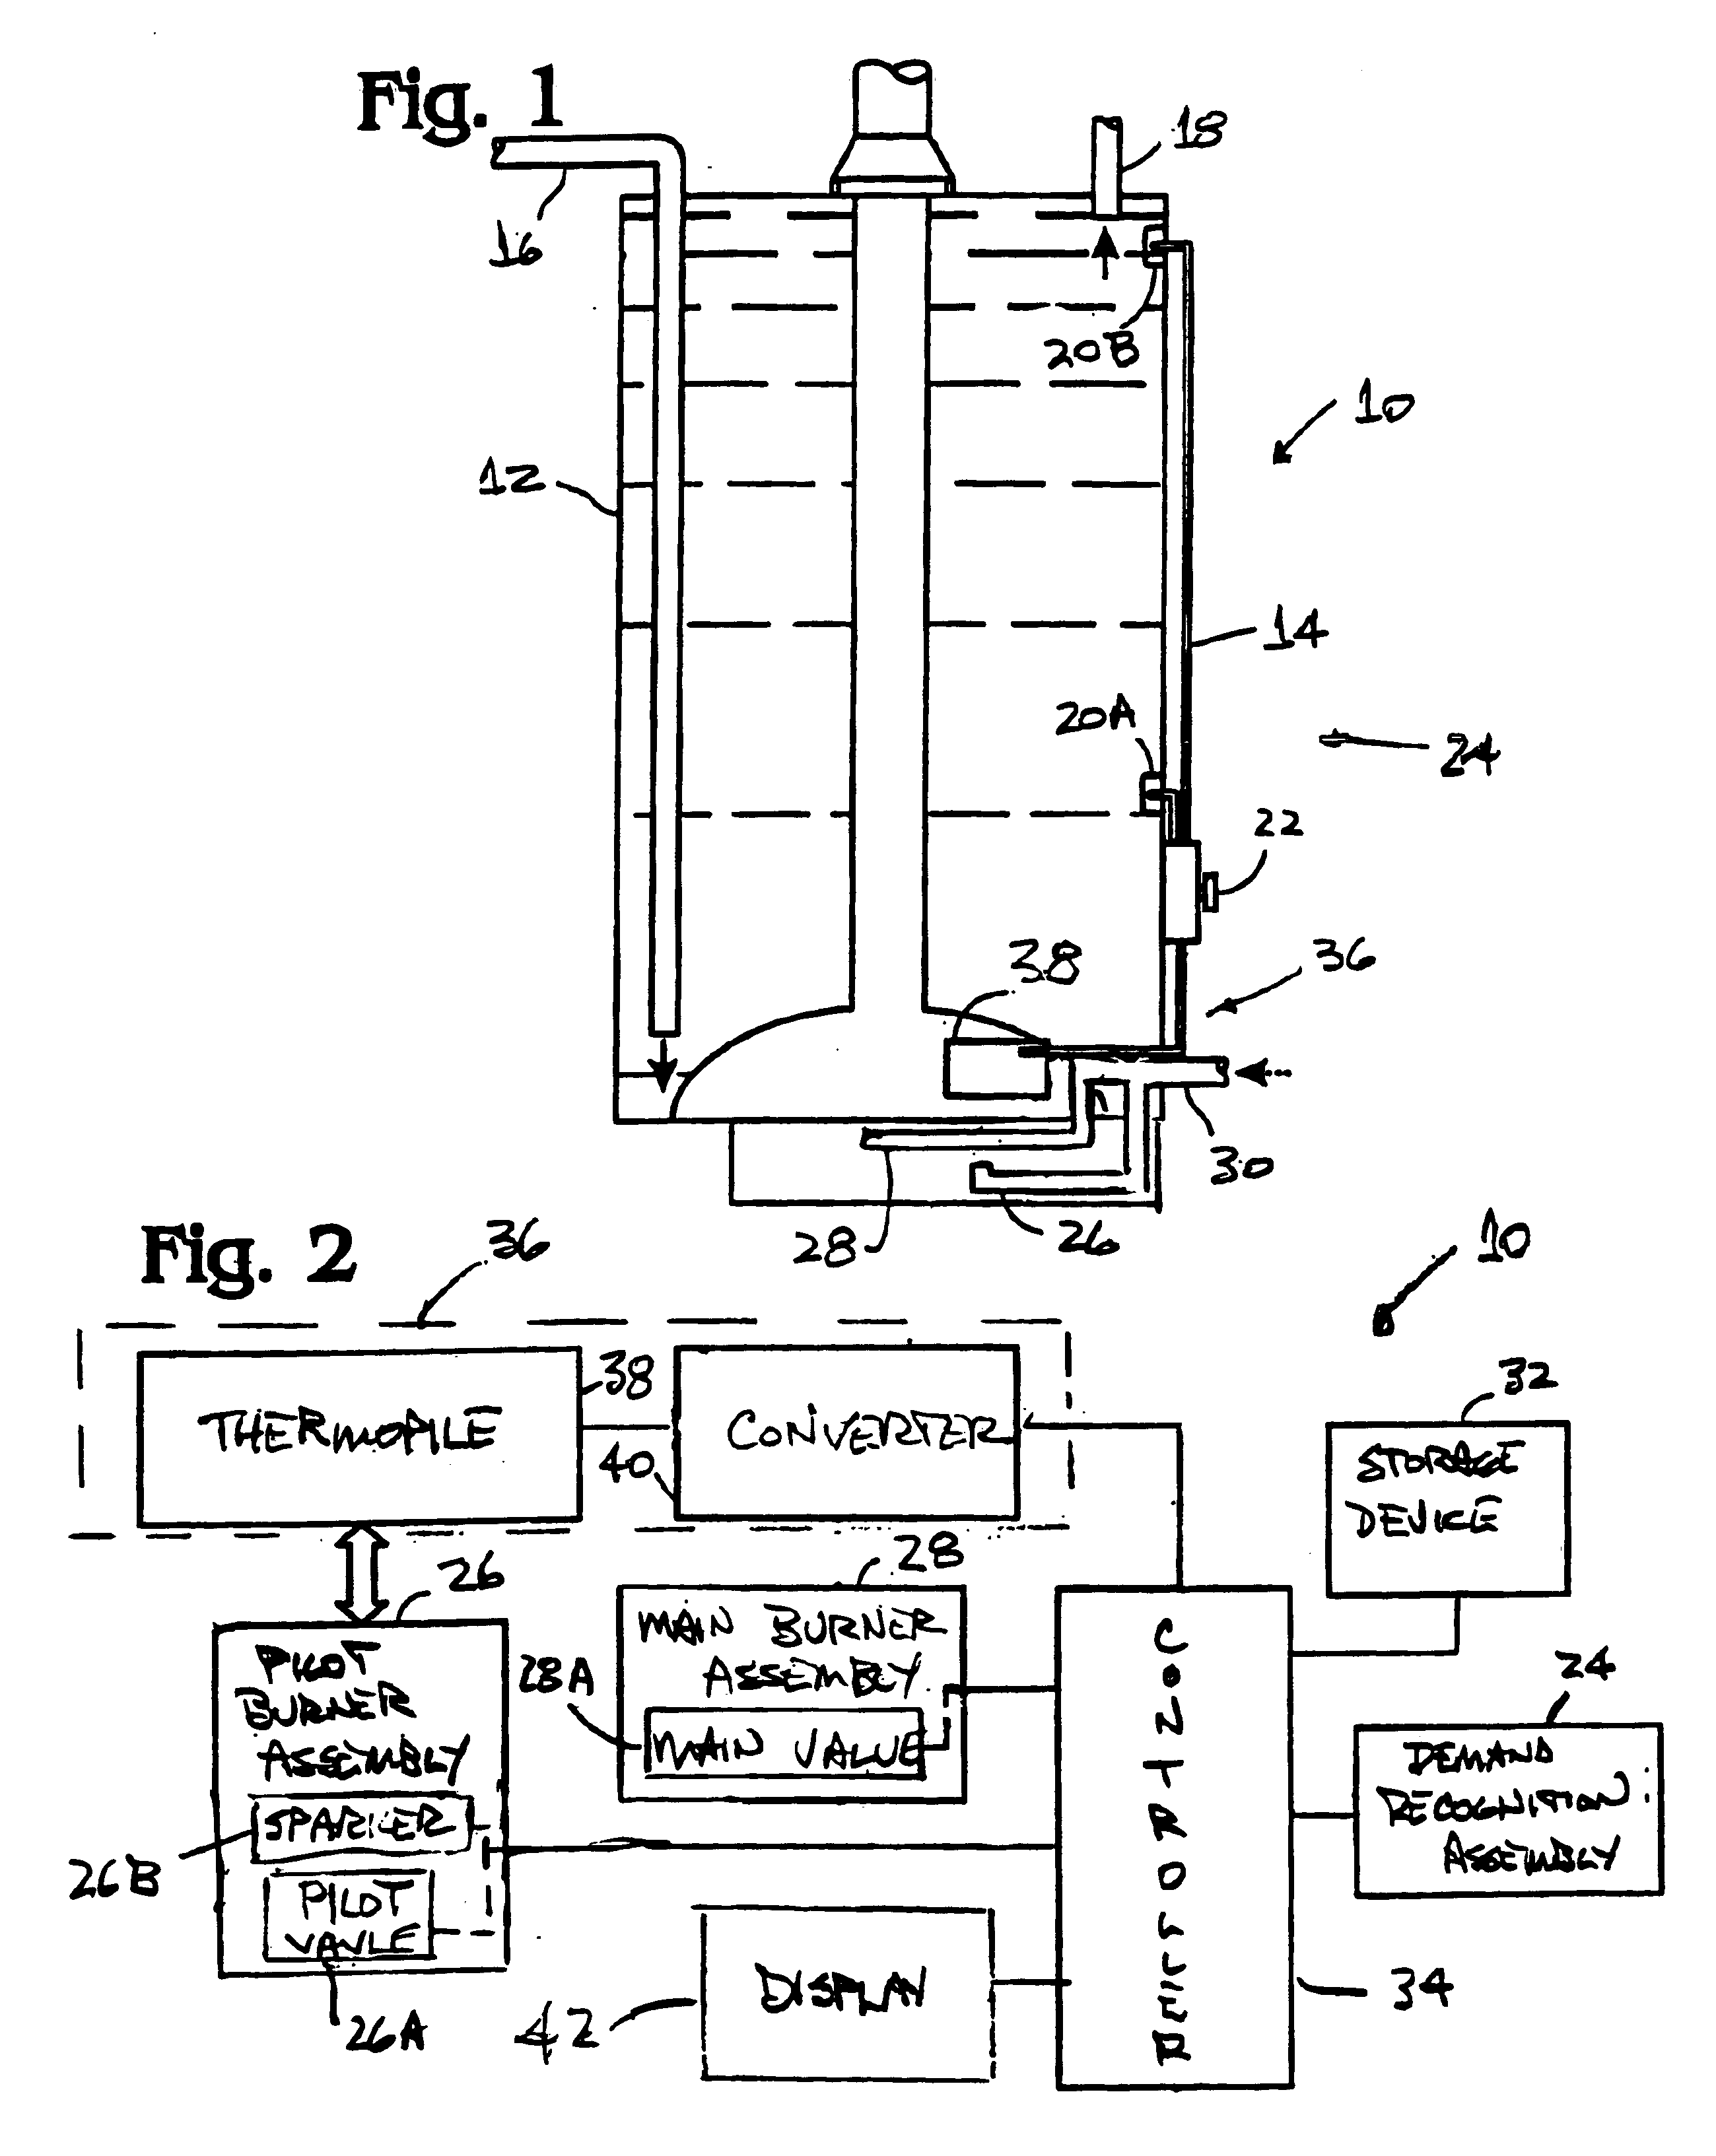 Self-sustaining control for a heating system